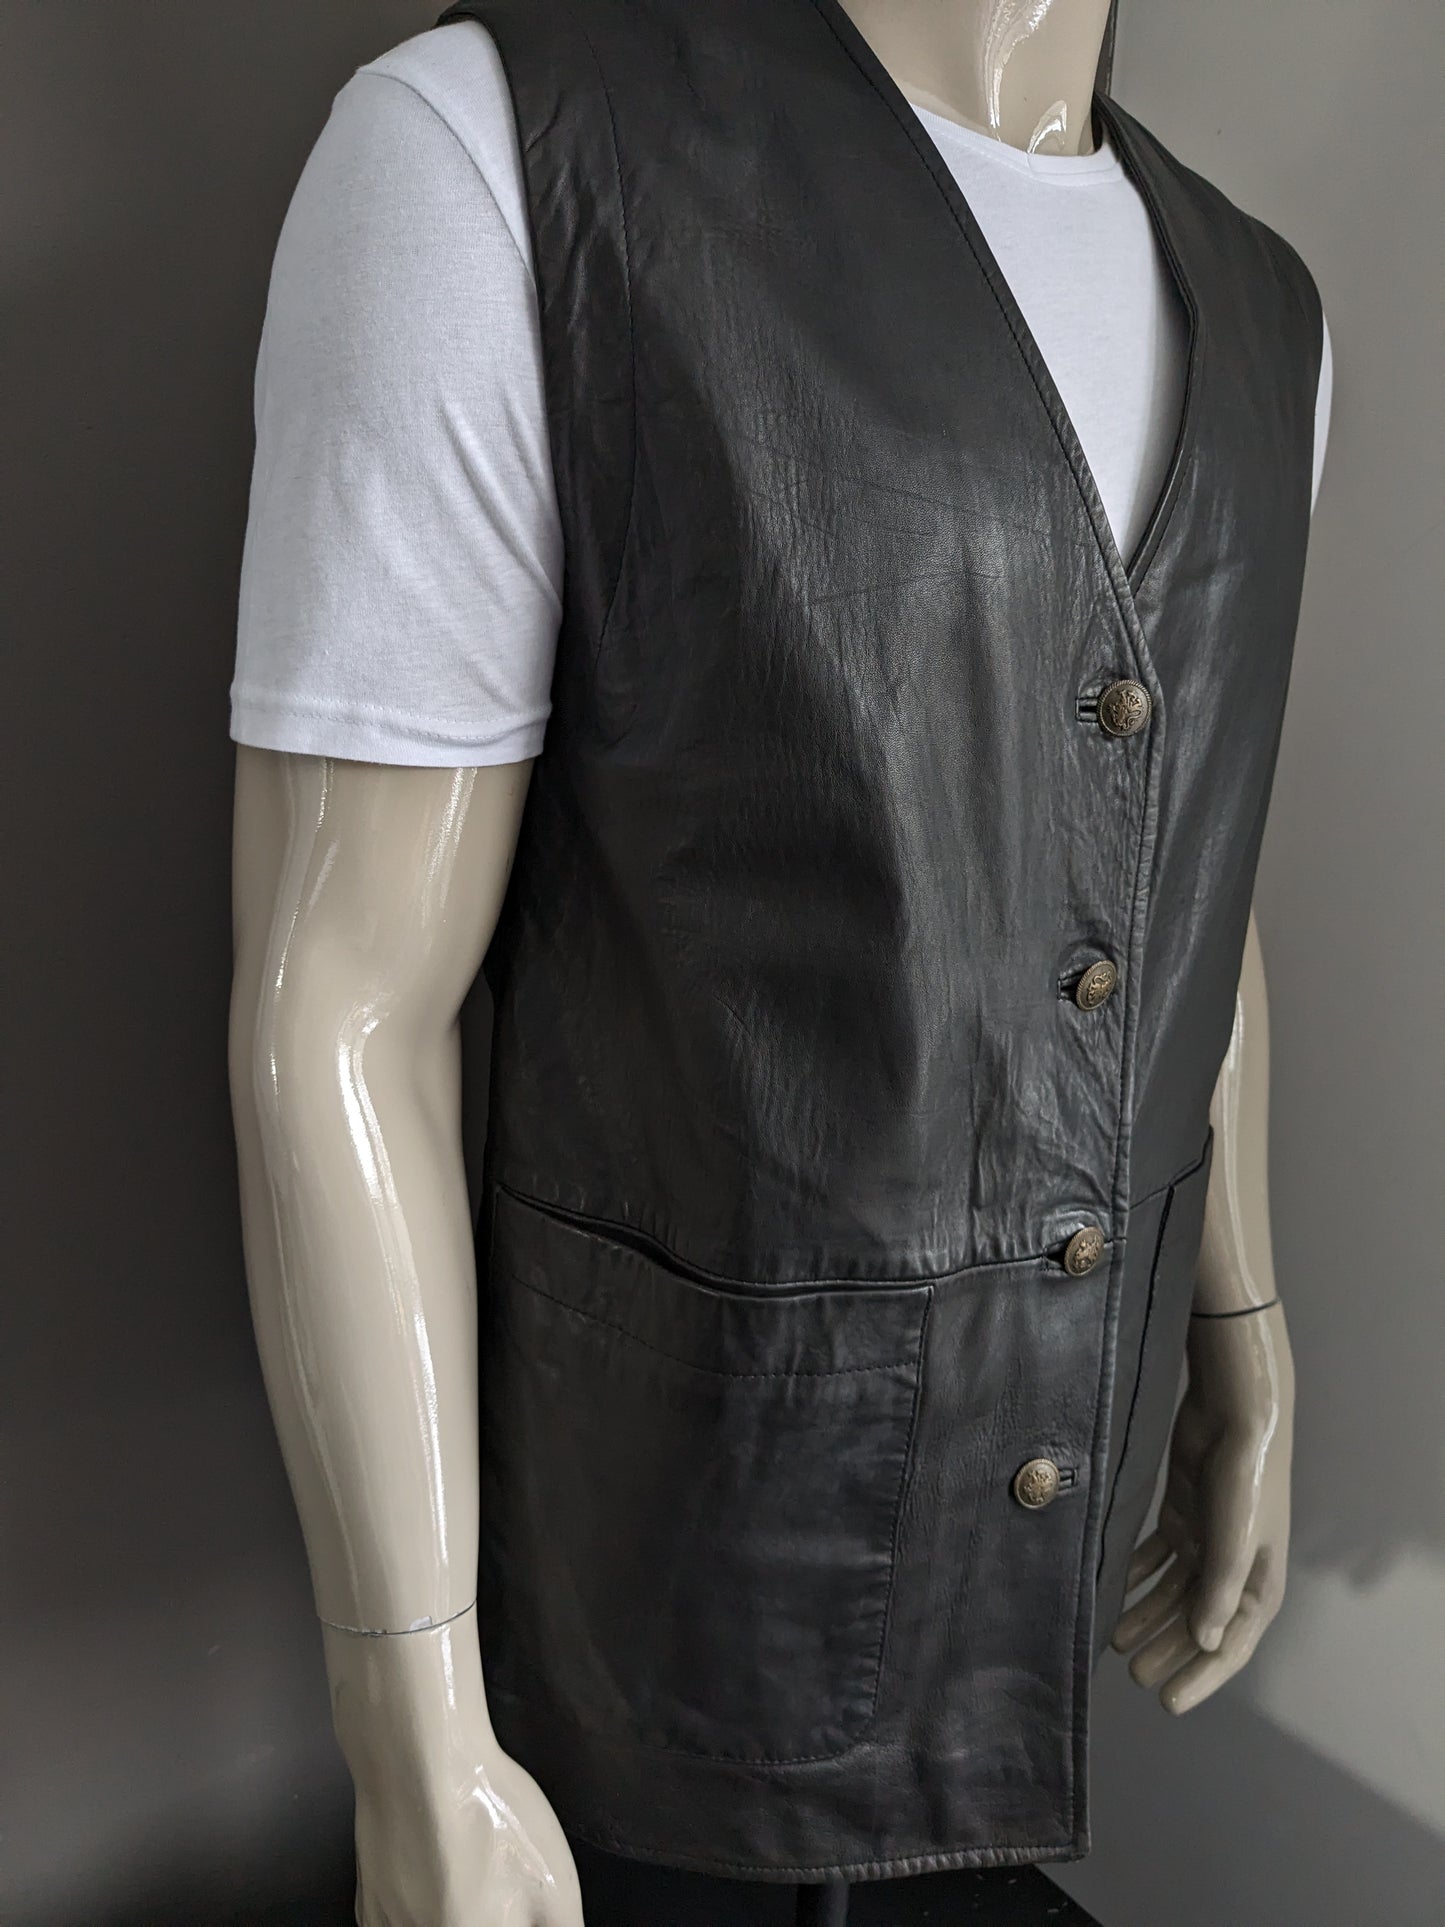 Medium length double -sided leather waistcoat with beautiful buttons. Dark brown. Size L.